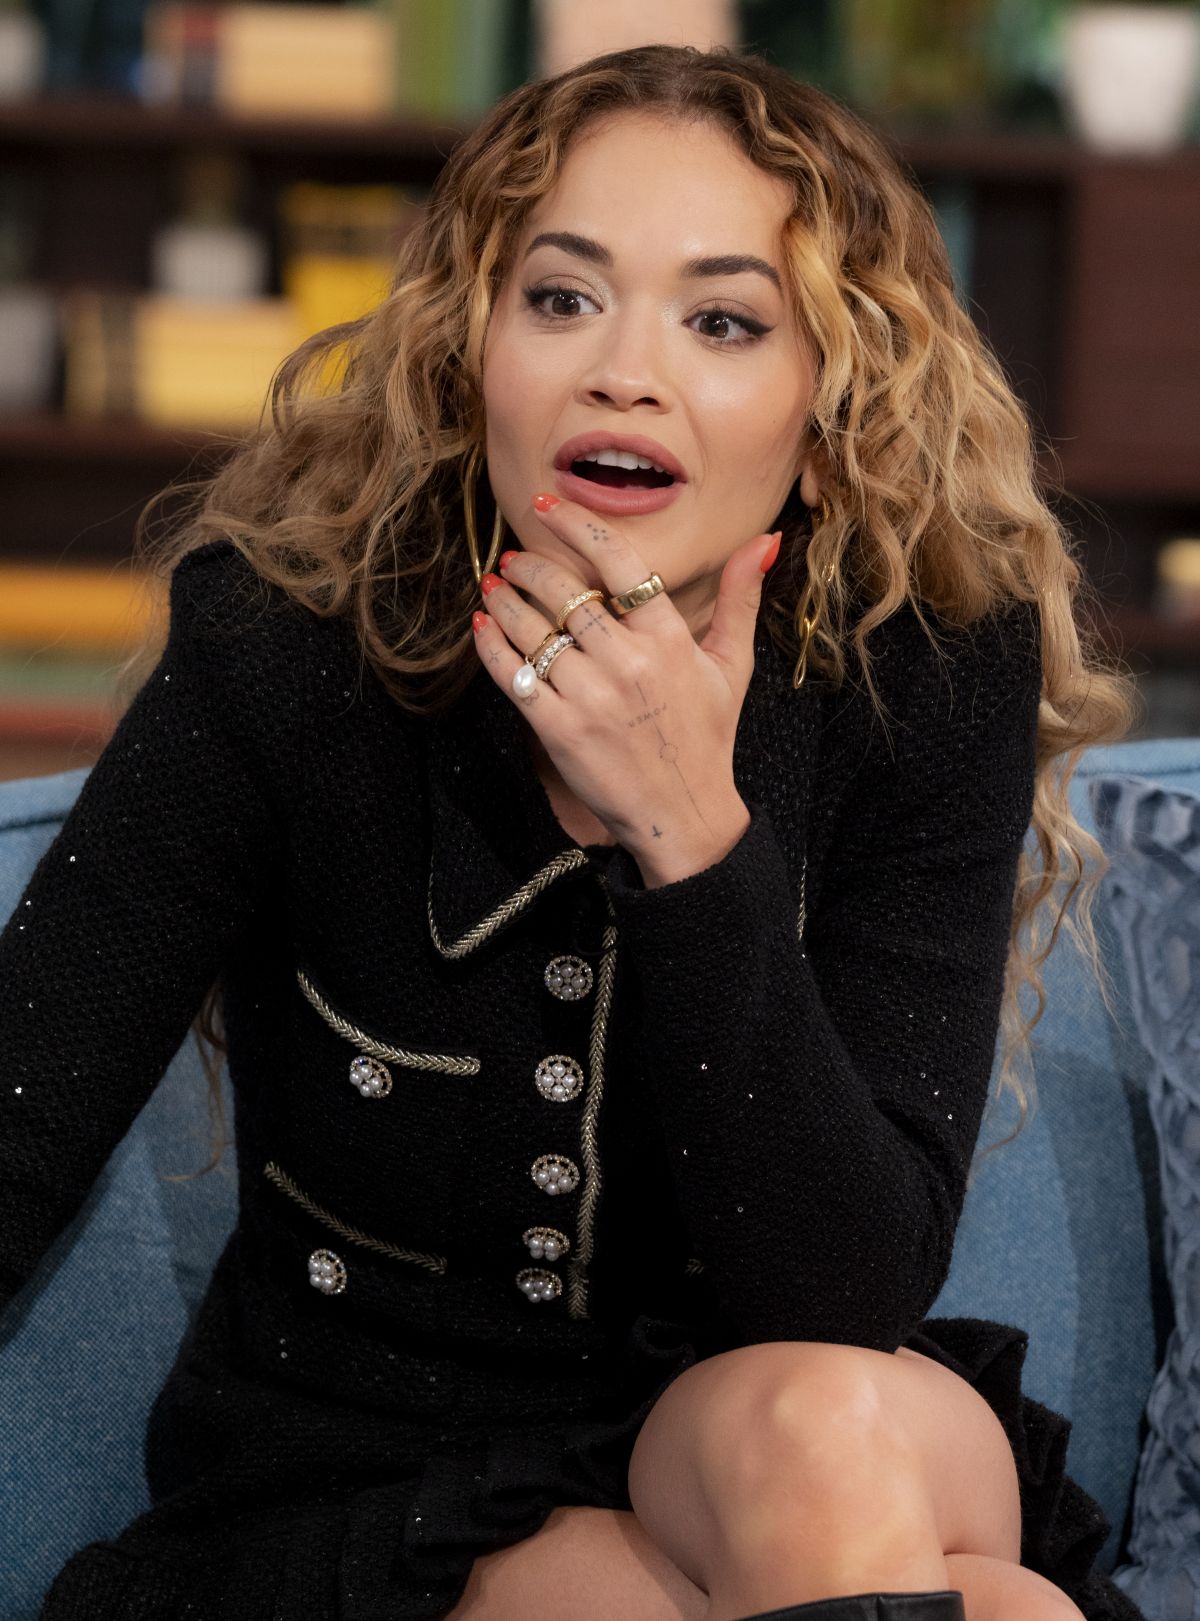 Rita Ora Vibrant Appearance on This Morning Show